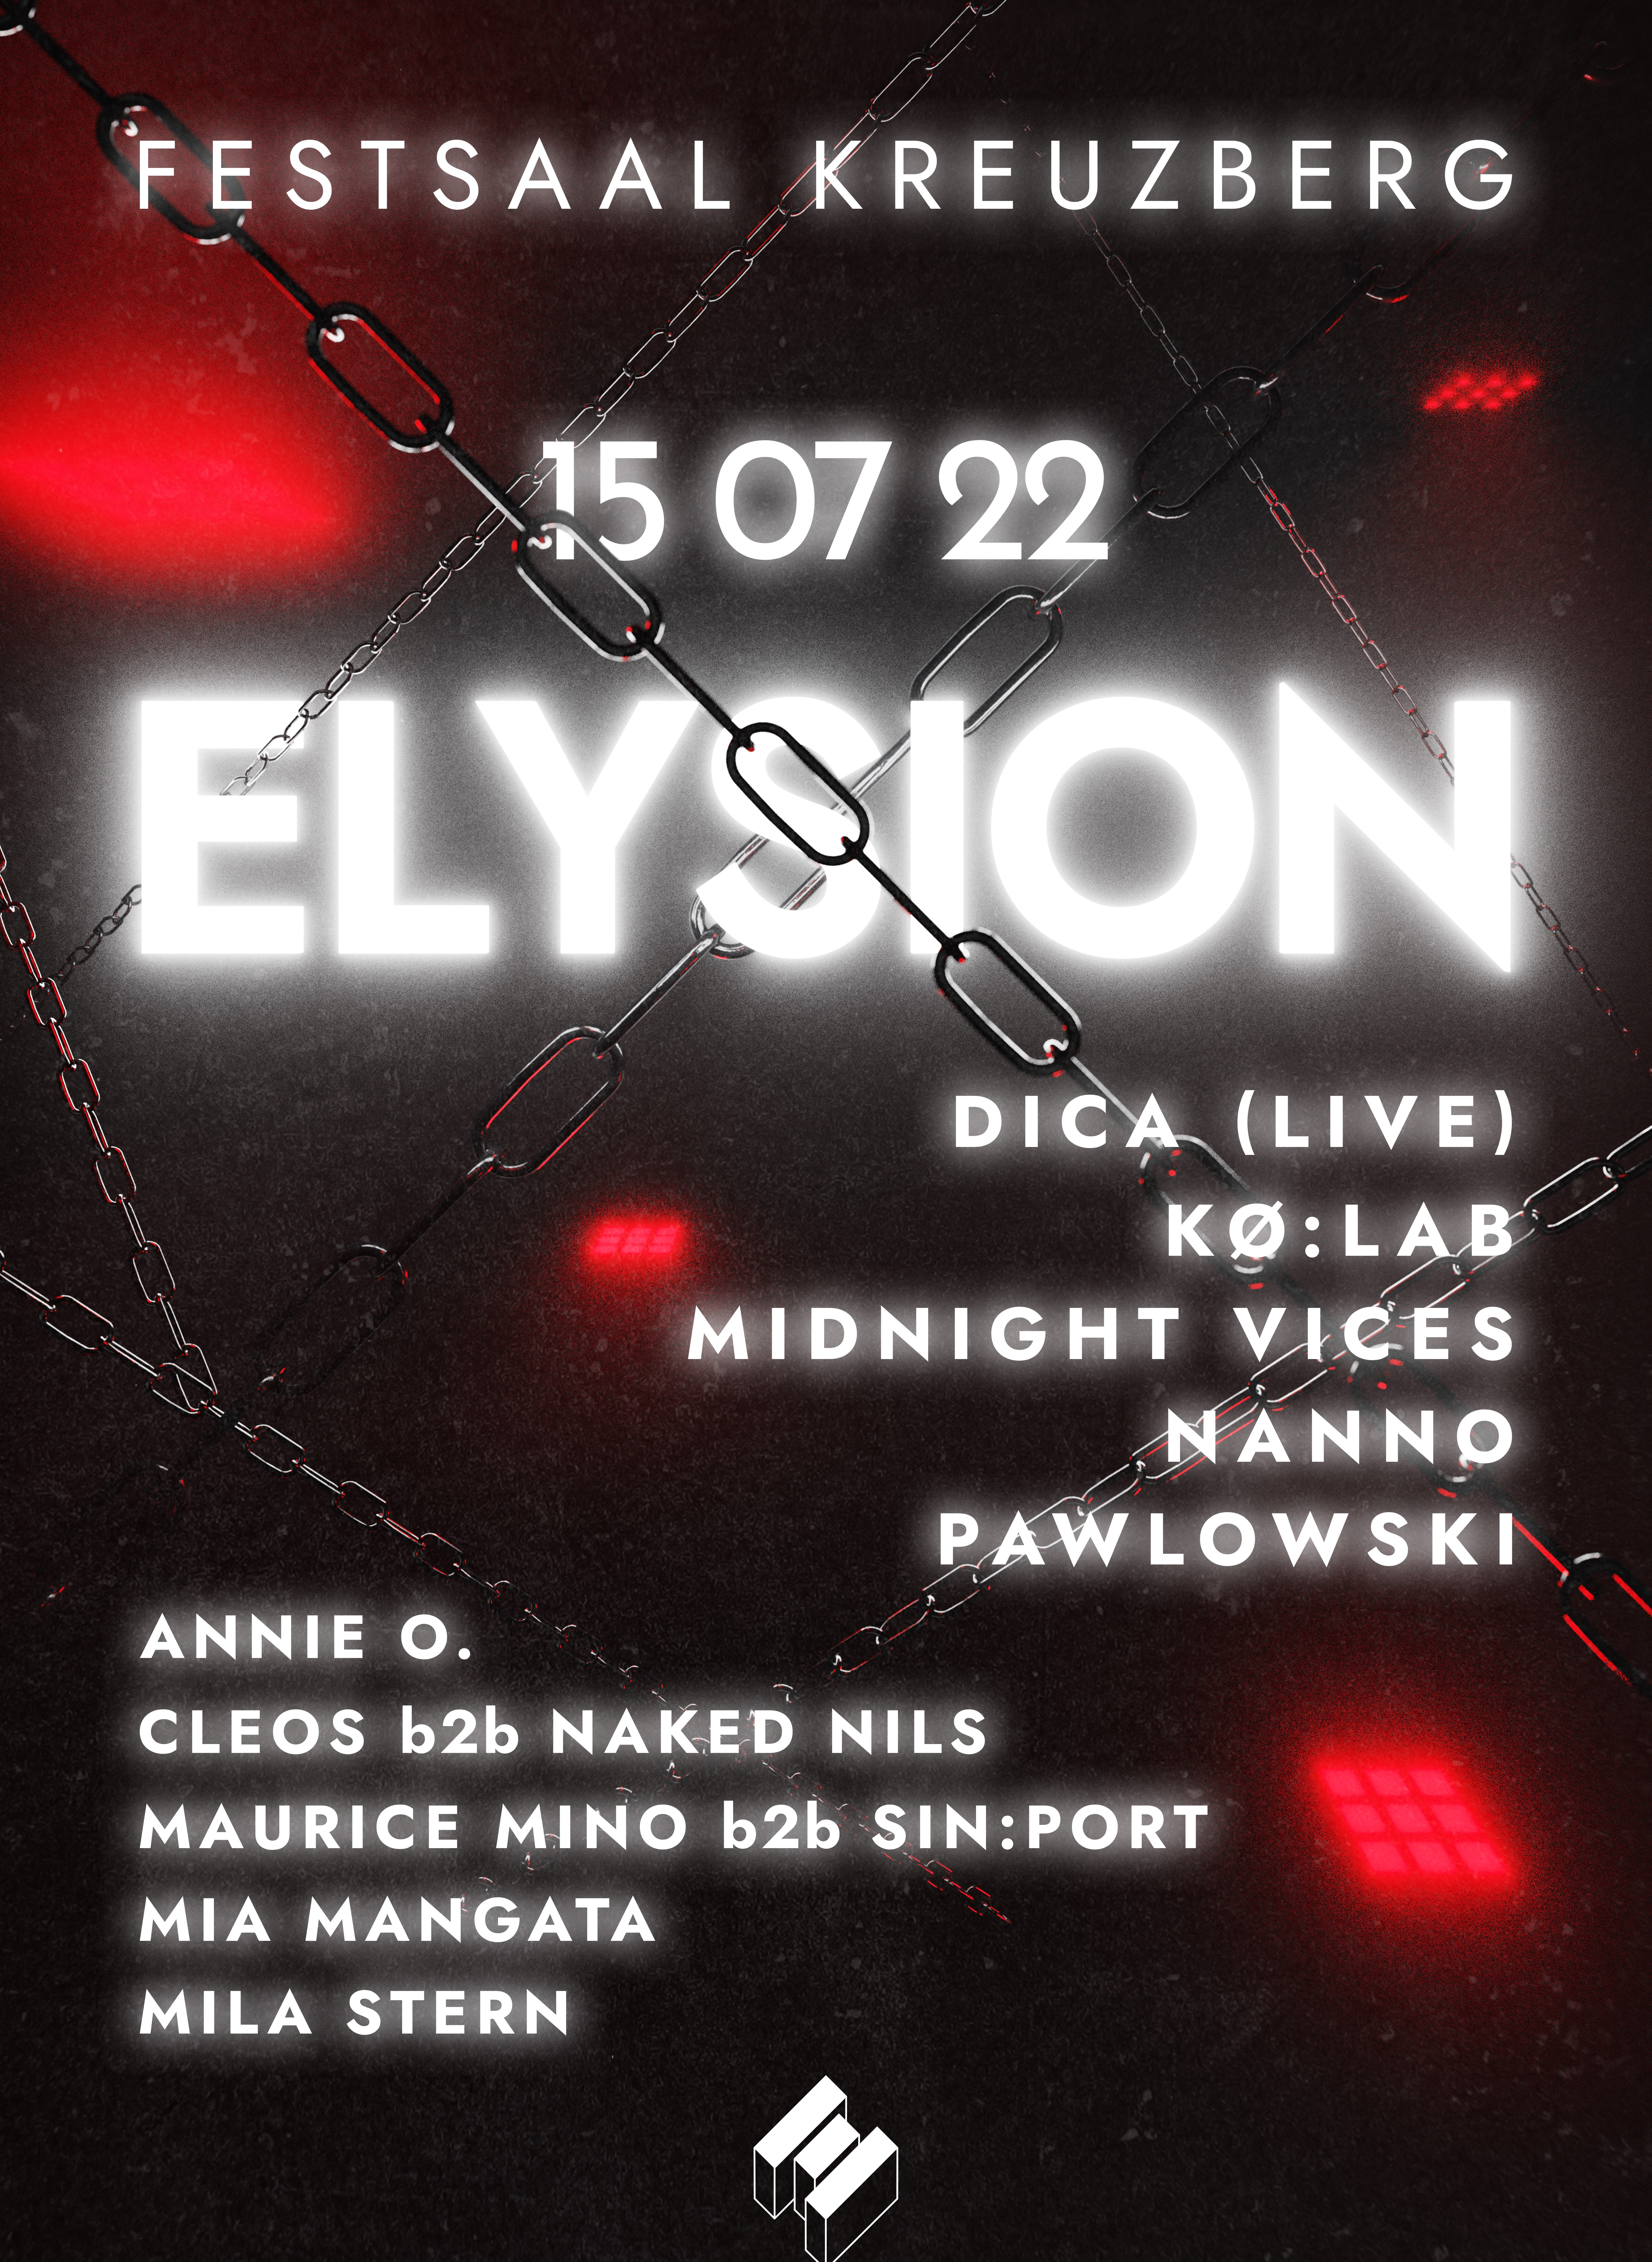 Elysion with Midnight Vices, Pawlowski, Dica  - Flyer front